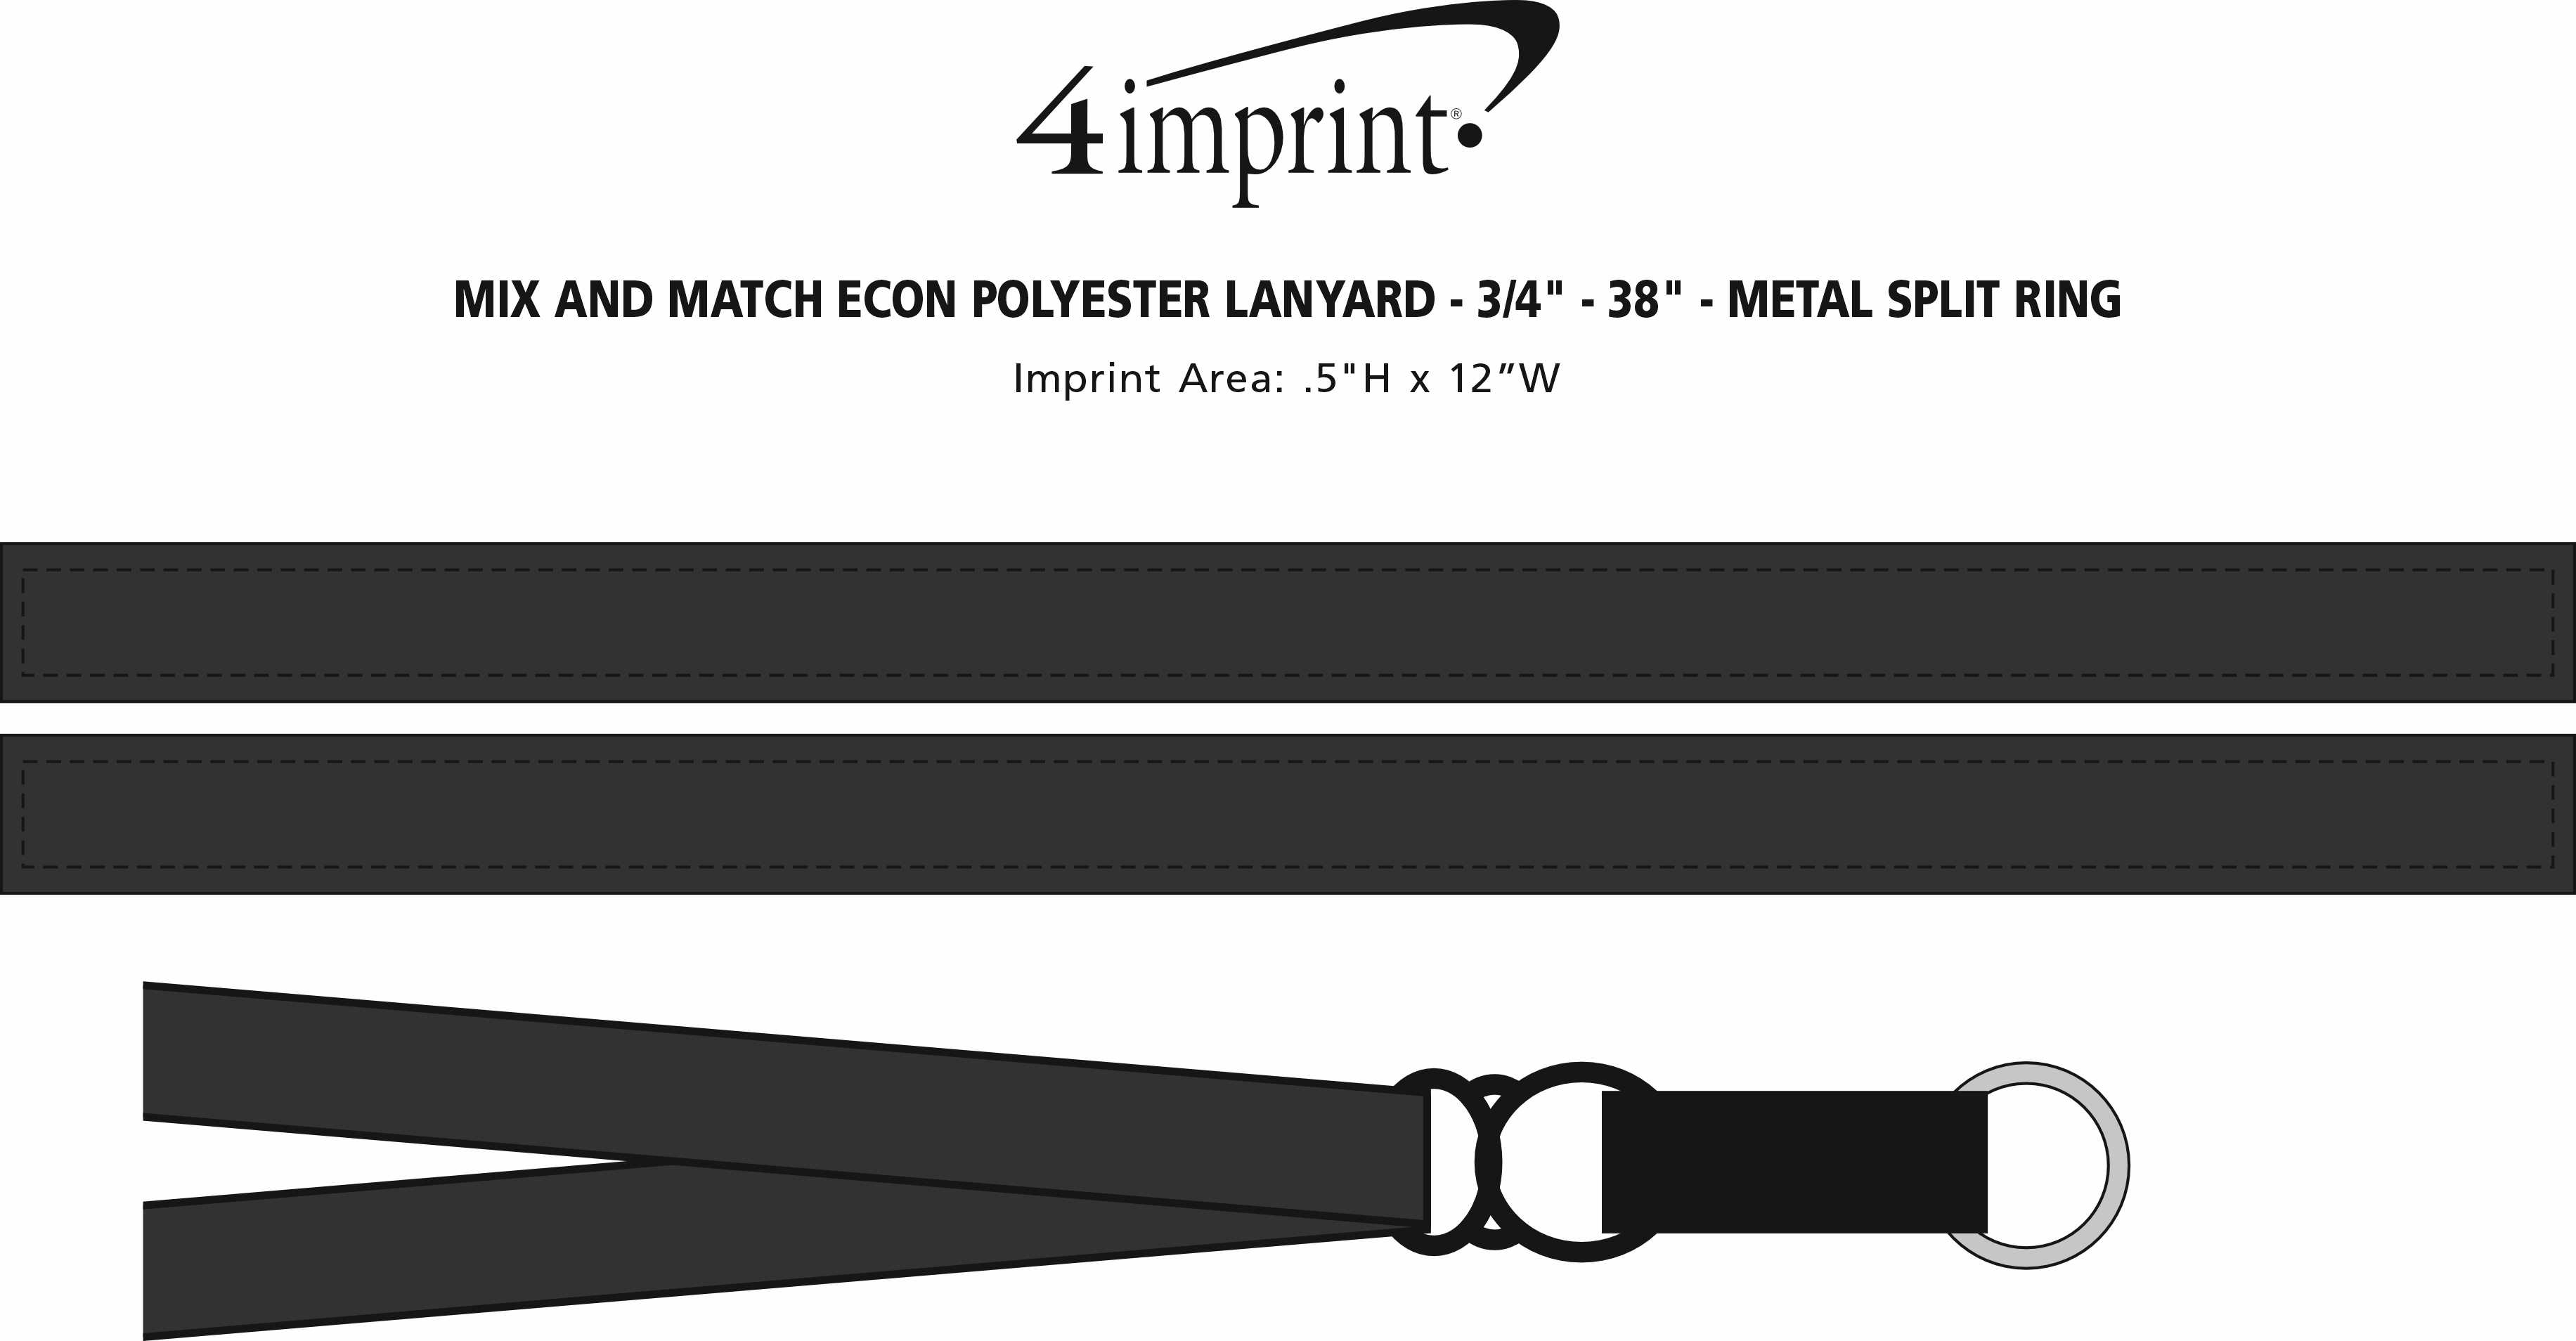 Imprint Area of Mix and Match Econ Polyester Lanyard - 3/4" - 38" - Metal Split Ring